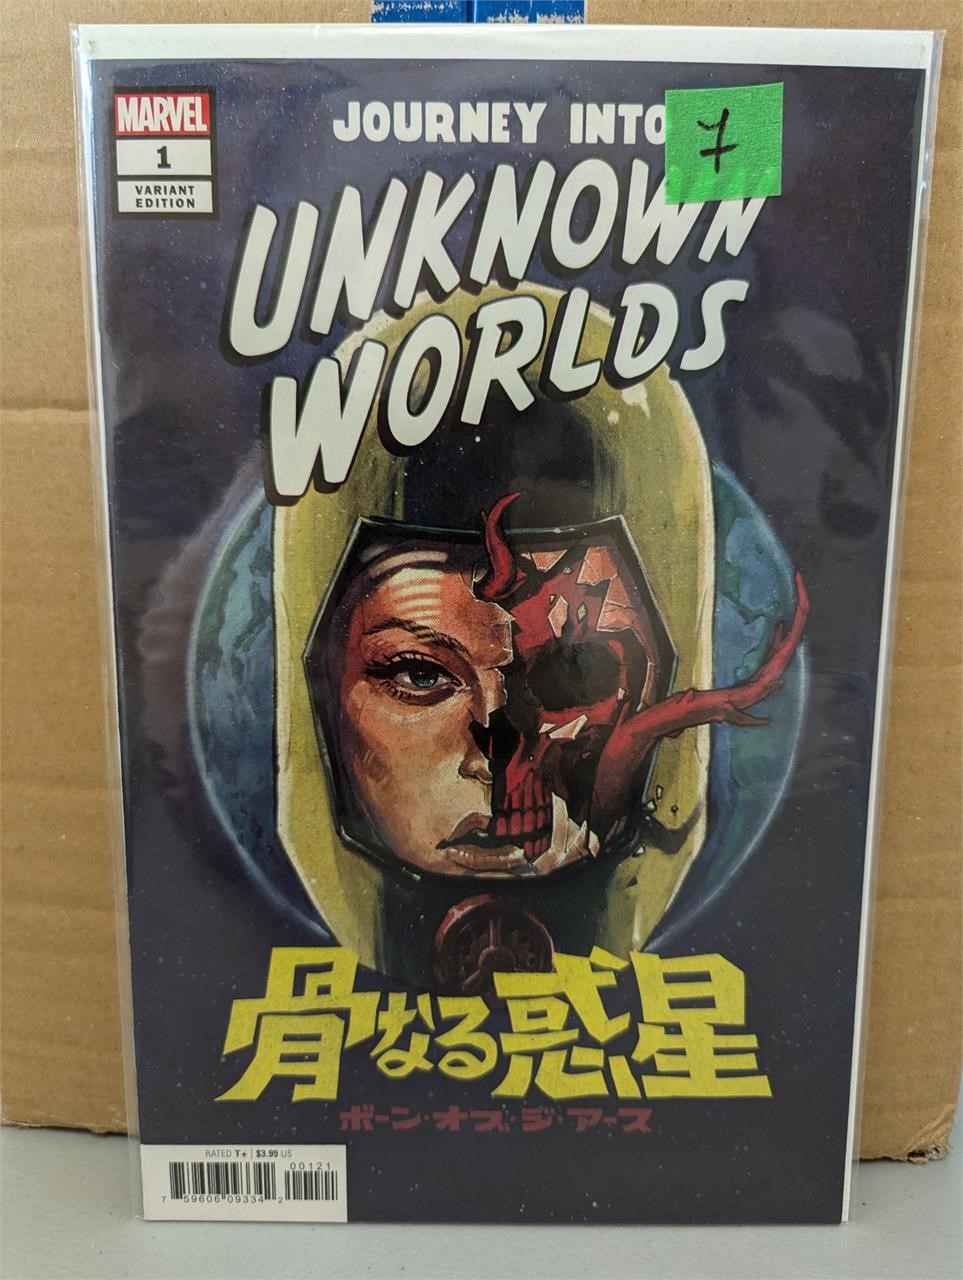 Journey Into Unknown Worlds,Vol. 2 #1B Variant